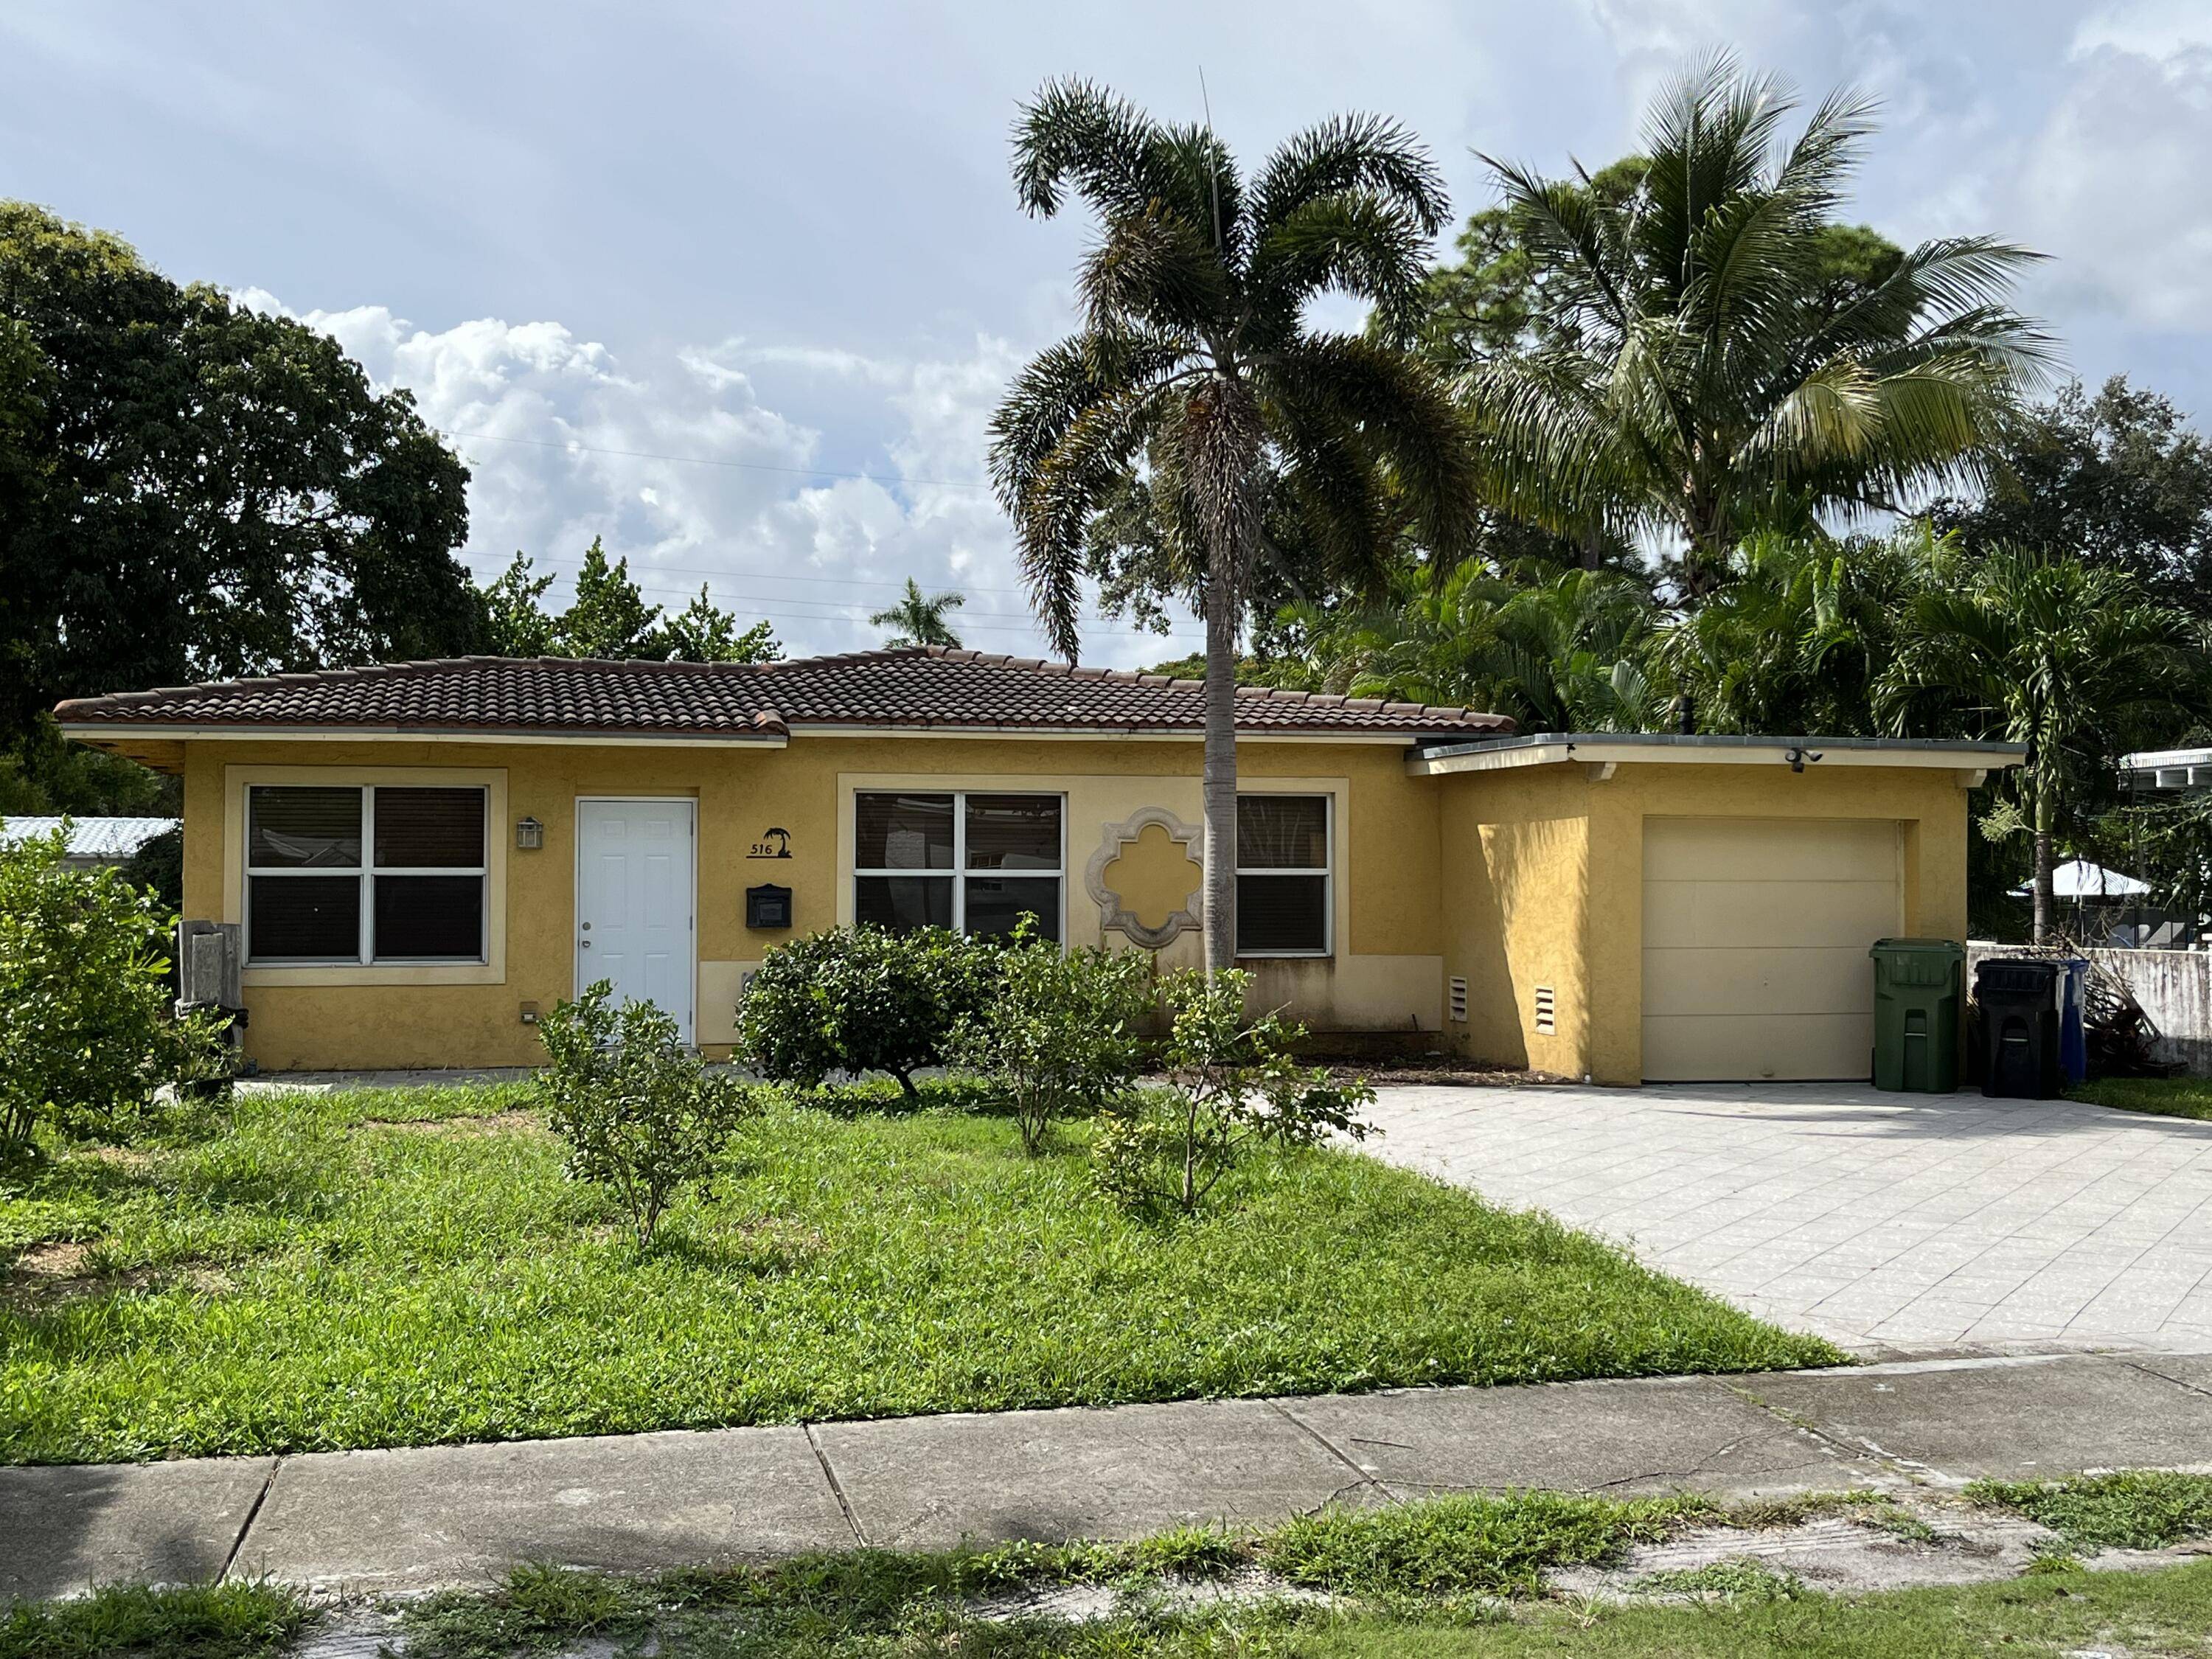 Quaint Newly renovated 3 bed 2 bath home for sale in Croissant Park, close to Downtown Fort Lauderdale, Las Olas, Beaches, Mall, Shopping Restaurants, minutes to Airport, 95 595 Turnpike.